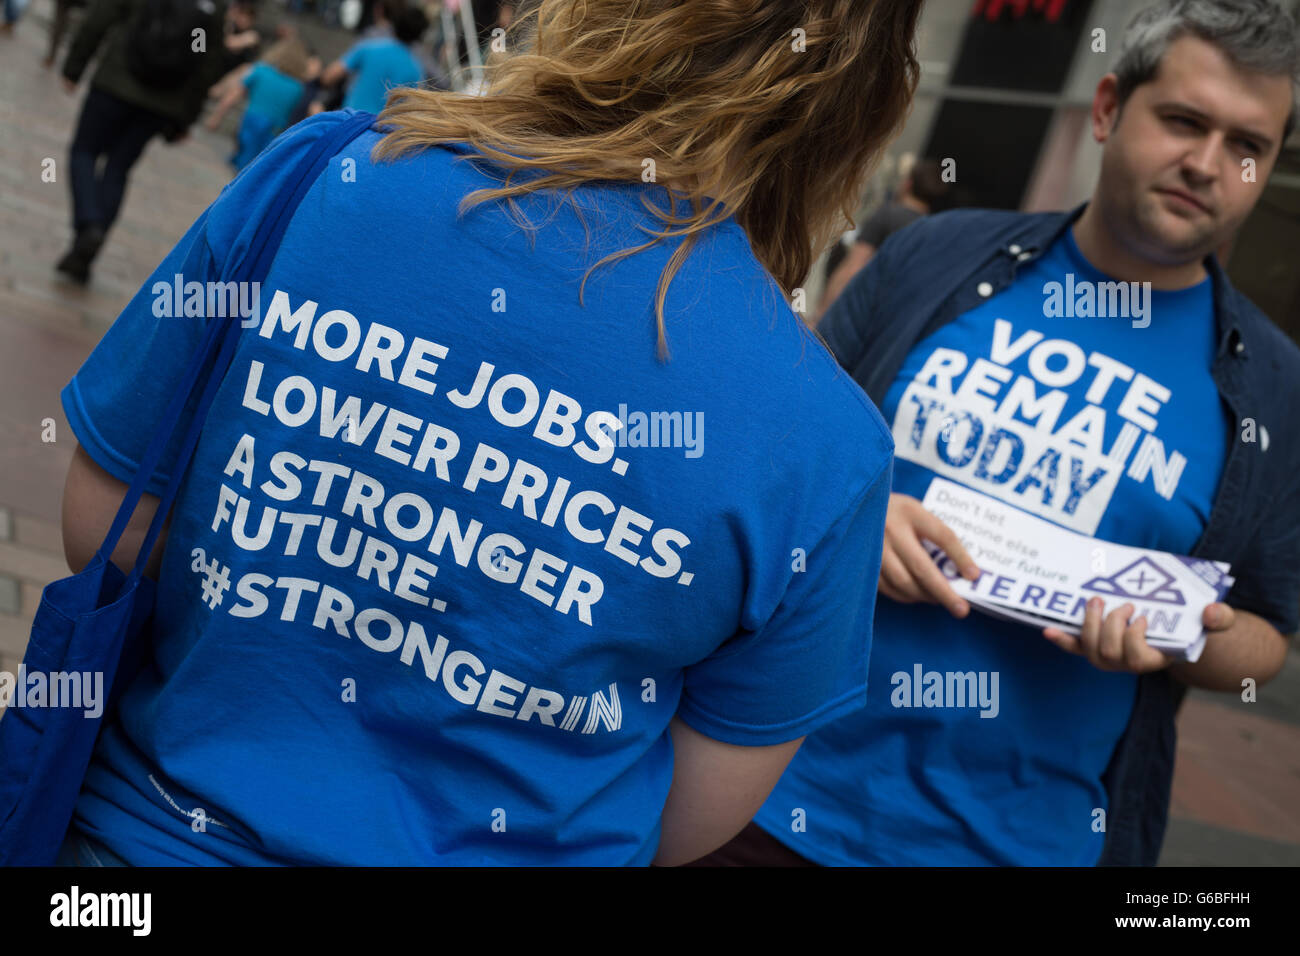 Glasgow, UK. 23rd June, 2016. 'Remain' campaigners out leafletting in Buchanan Street, as voting takes place on the United Kingdom's referendum on European Union membership, in Glasgow, Scotland, on 23 June 2016. Credit:  jeremy sutton-hibbert/Alamy Live News Stock Photo